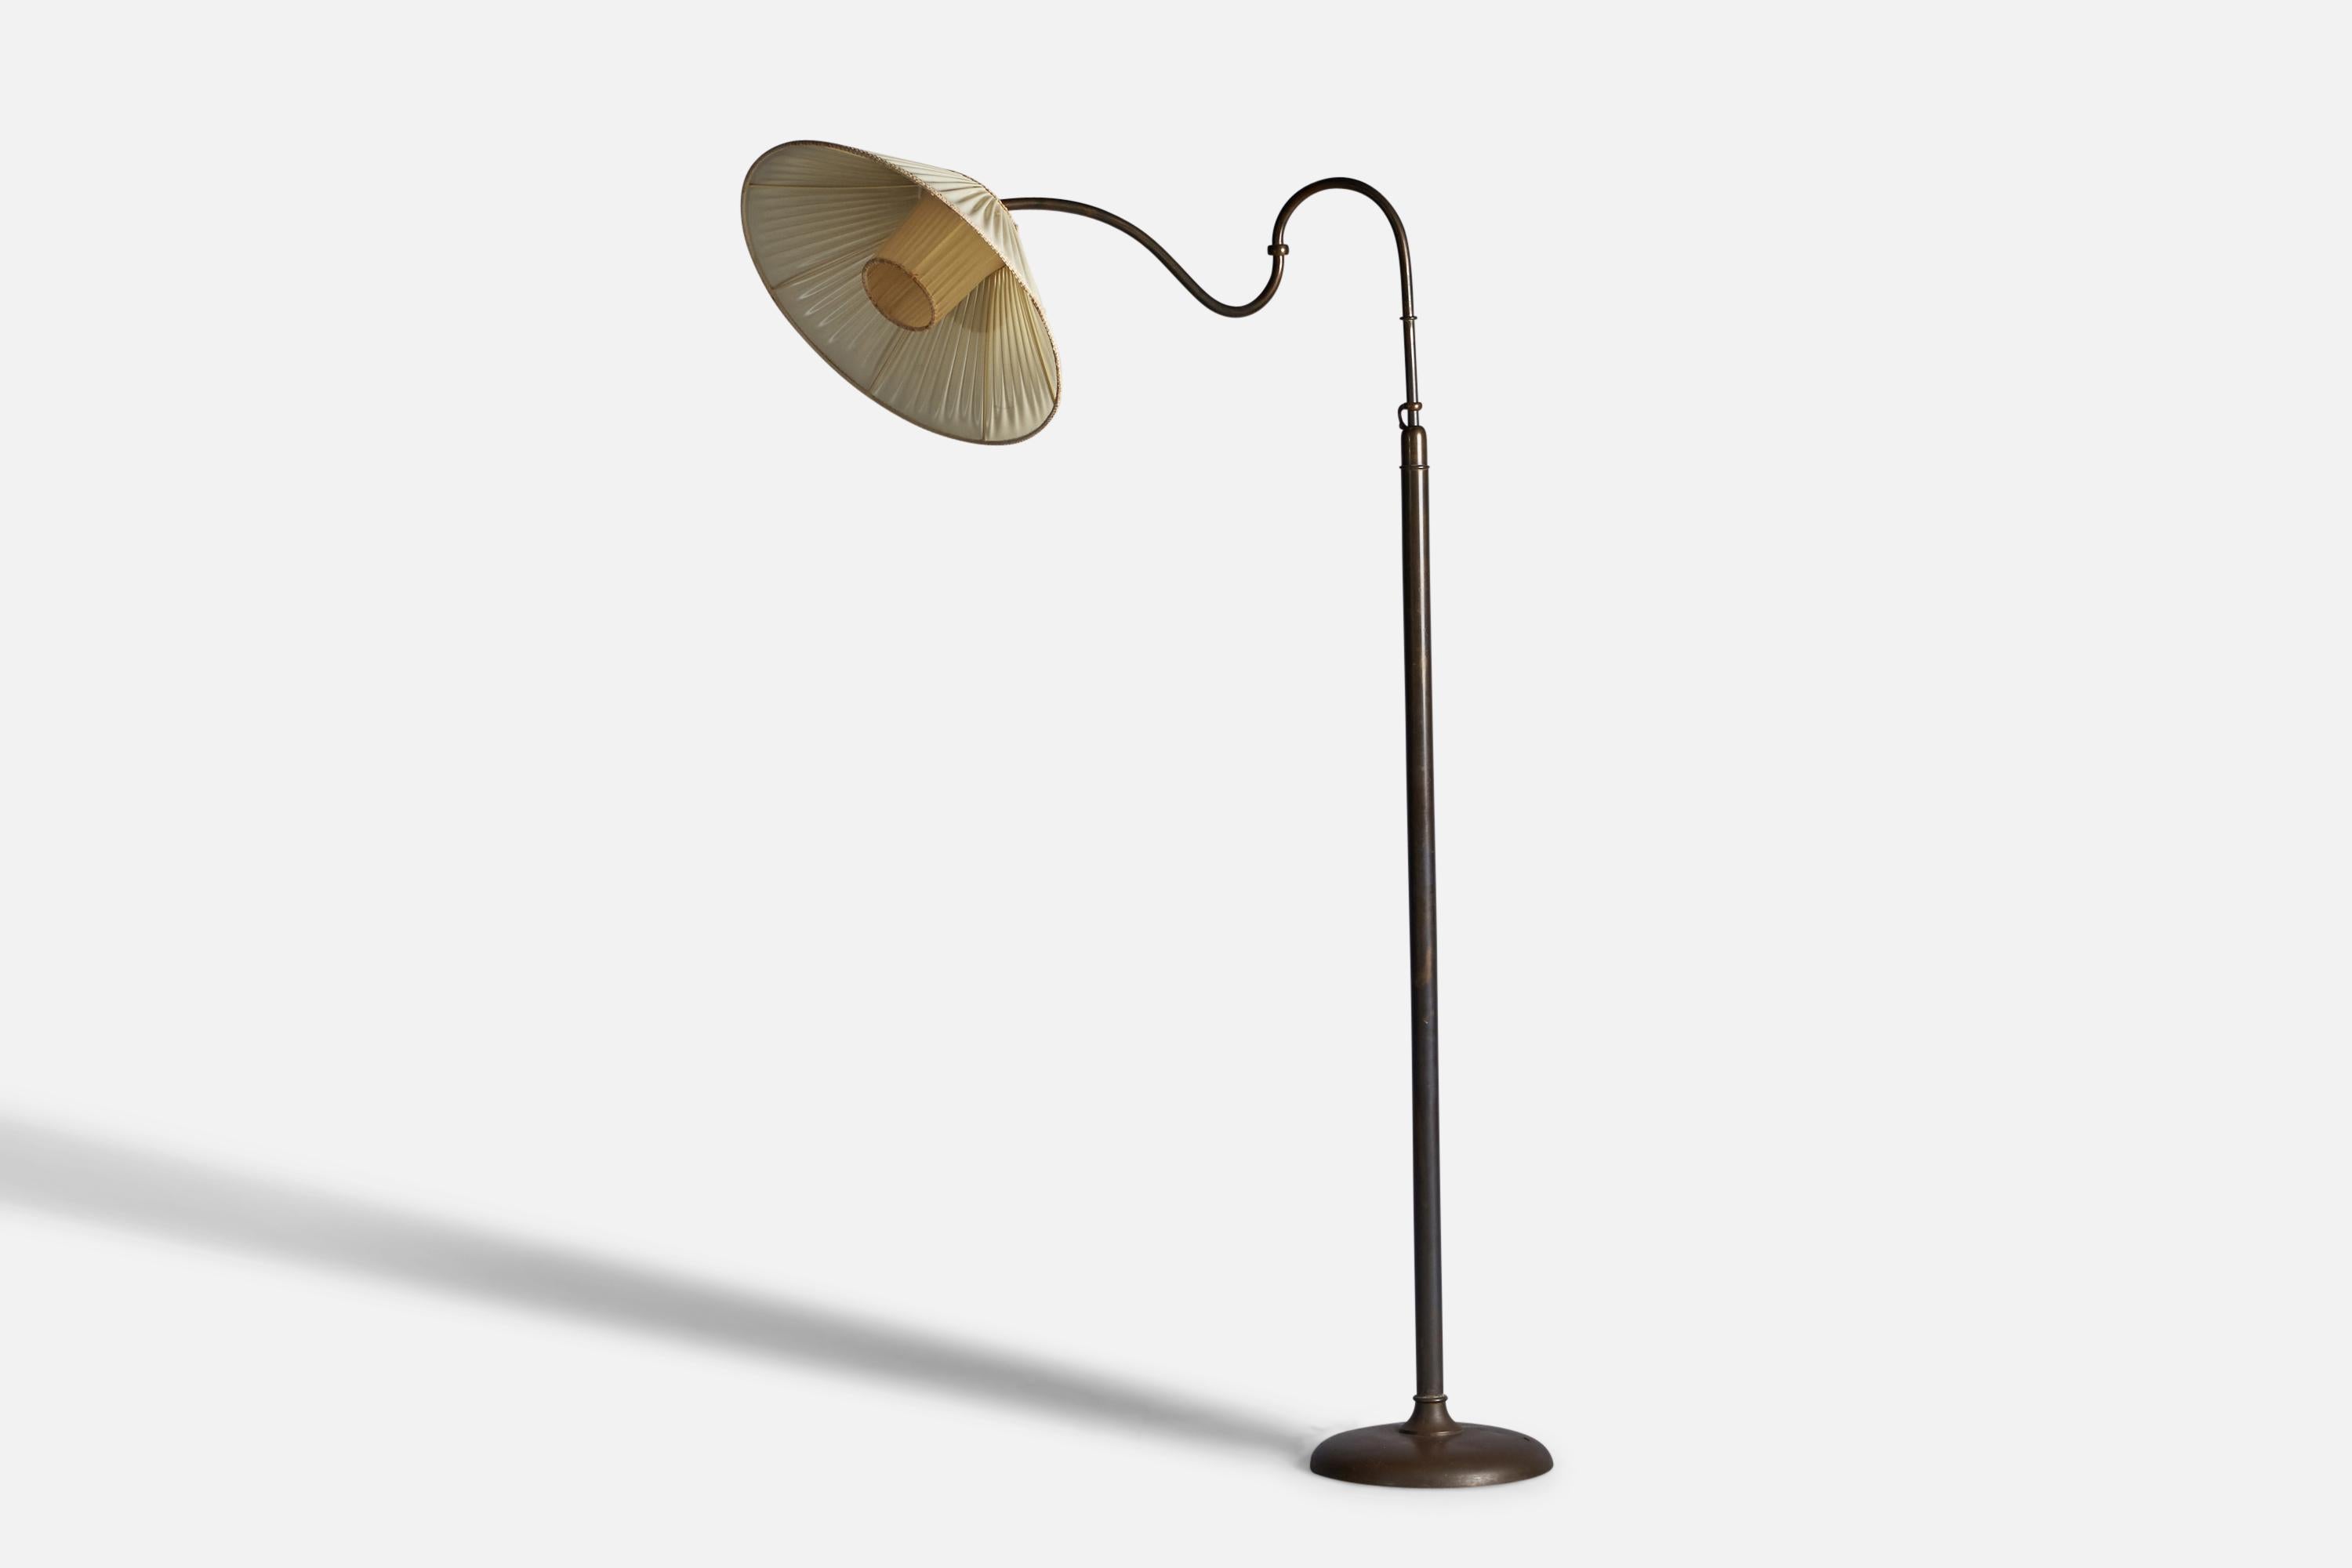 An adjustable brass and fabric floor lamp, designed and produced in Italy, c. 1940s.

Overall Dimensions: 66.75